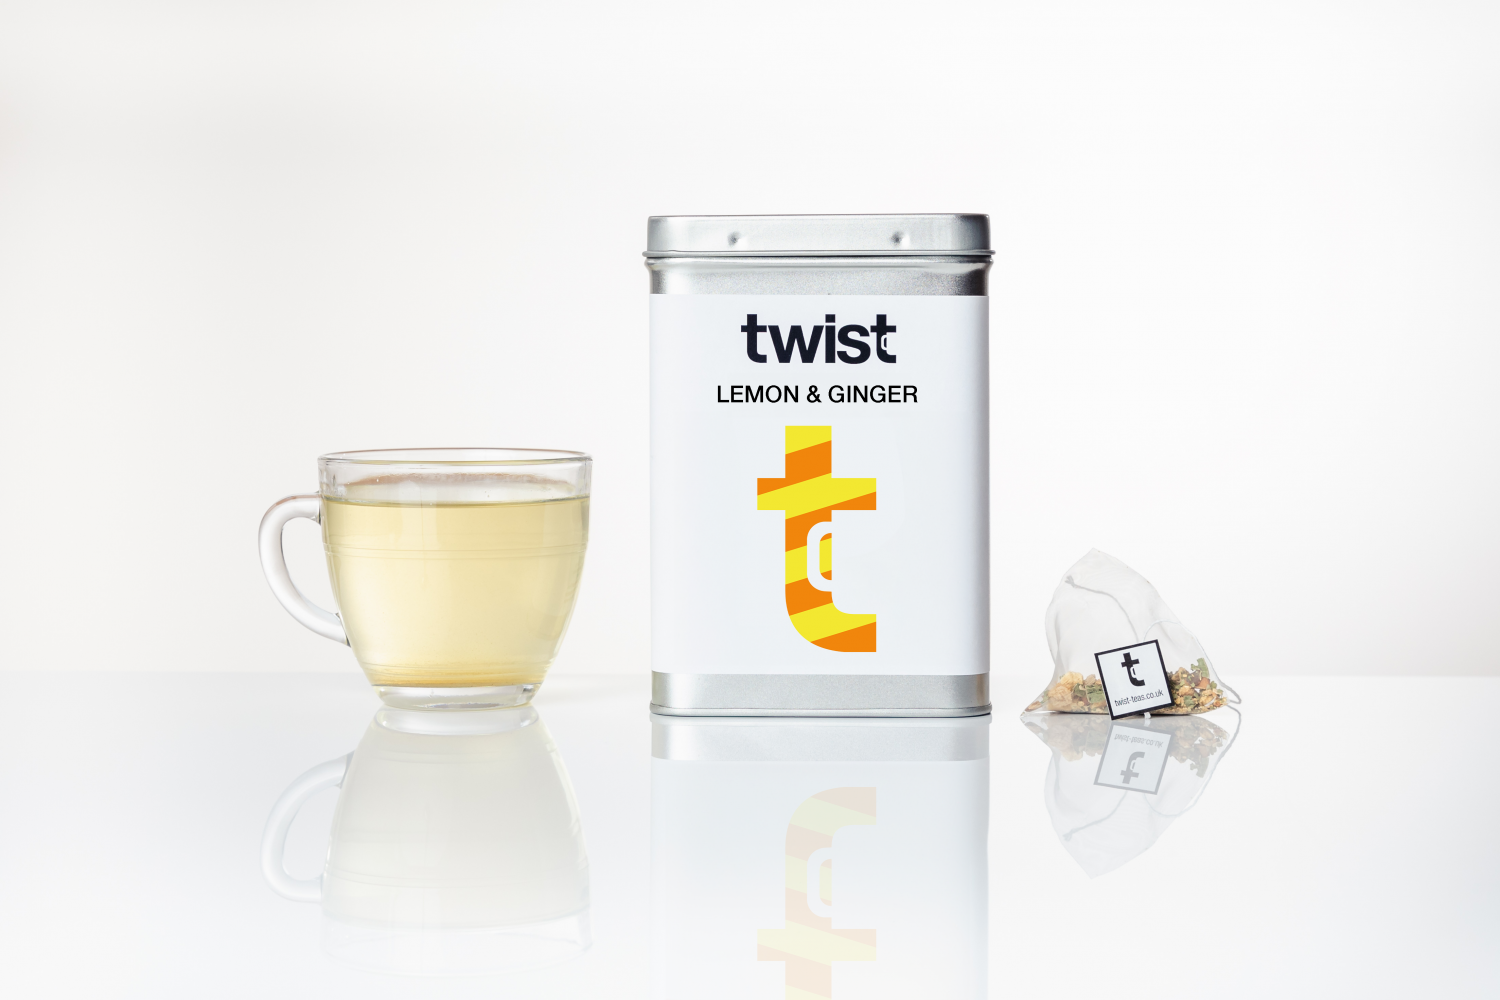 A lemon and ginger caddy personally positioned in between a brewed tea and a Twist Teas tea bag.